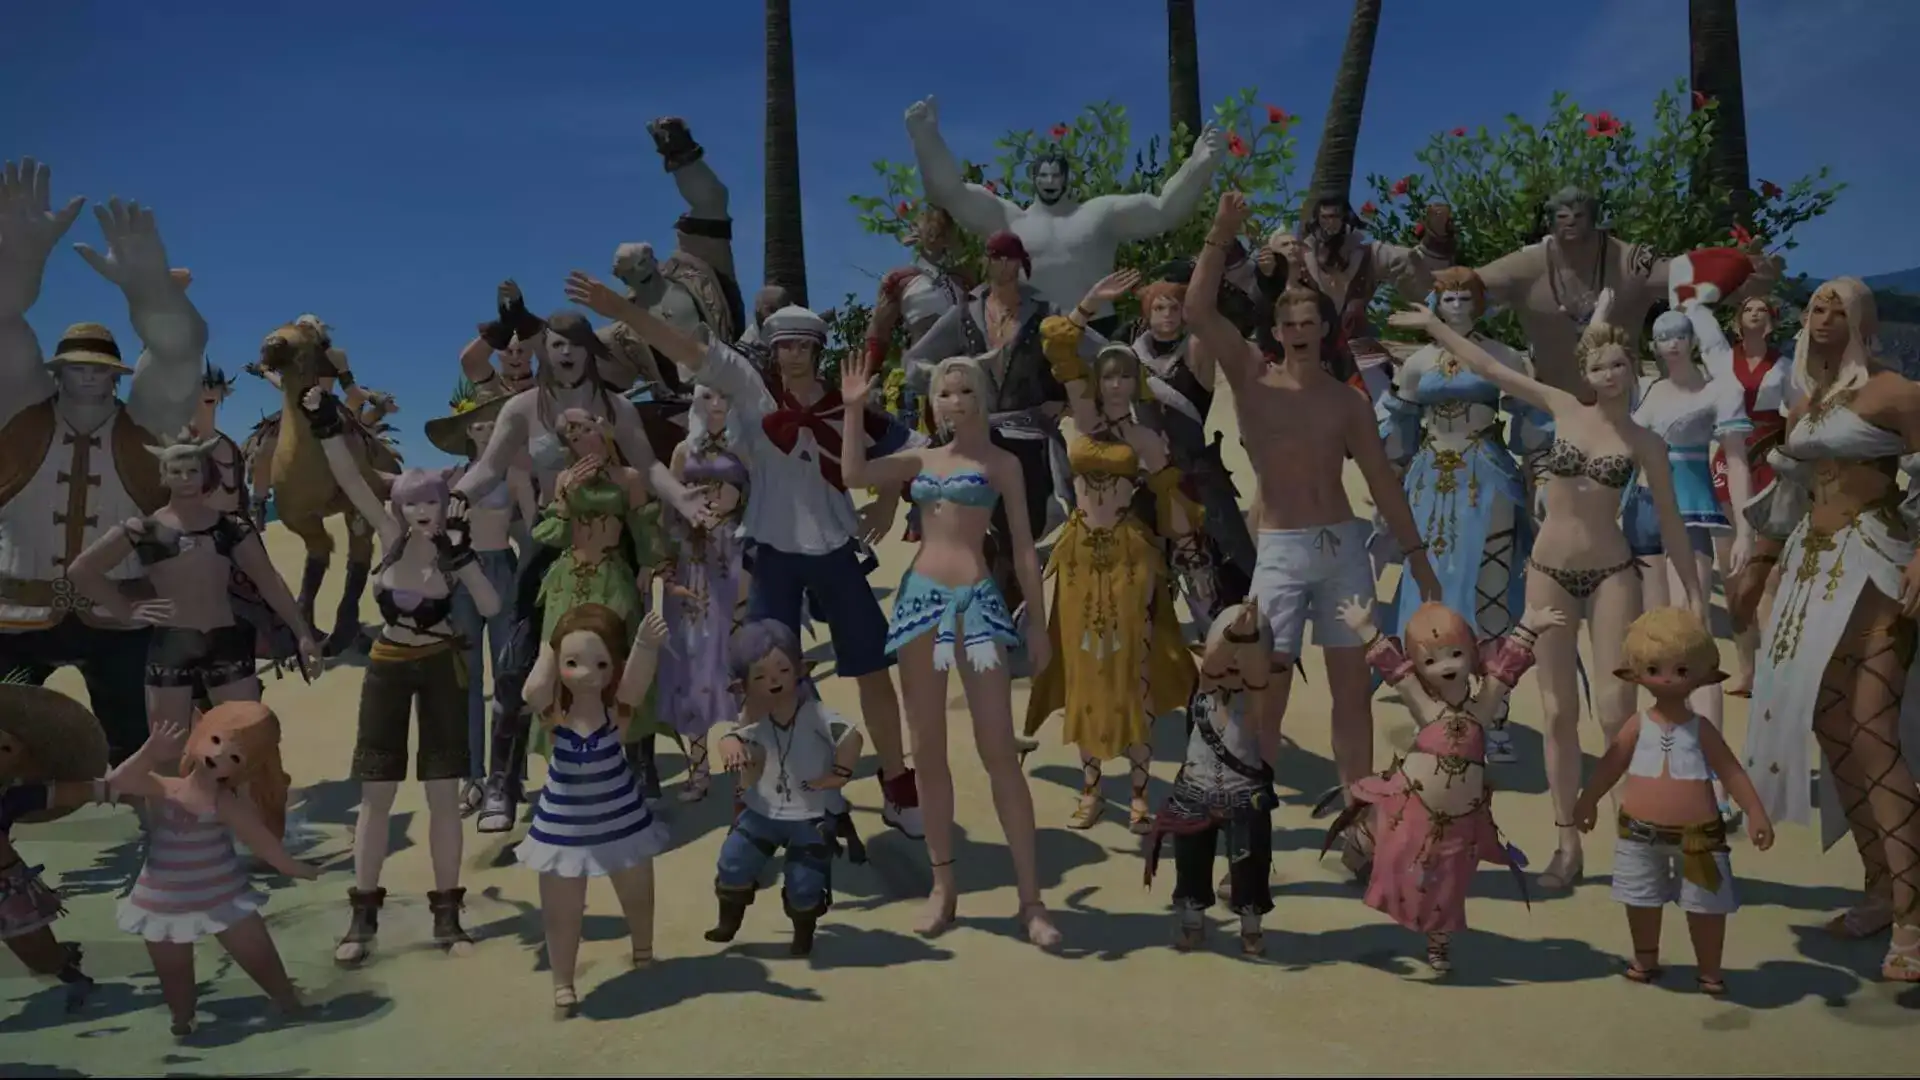 Group photo of Player Characters on the Beach